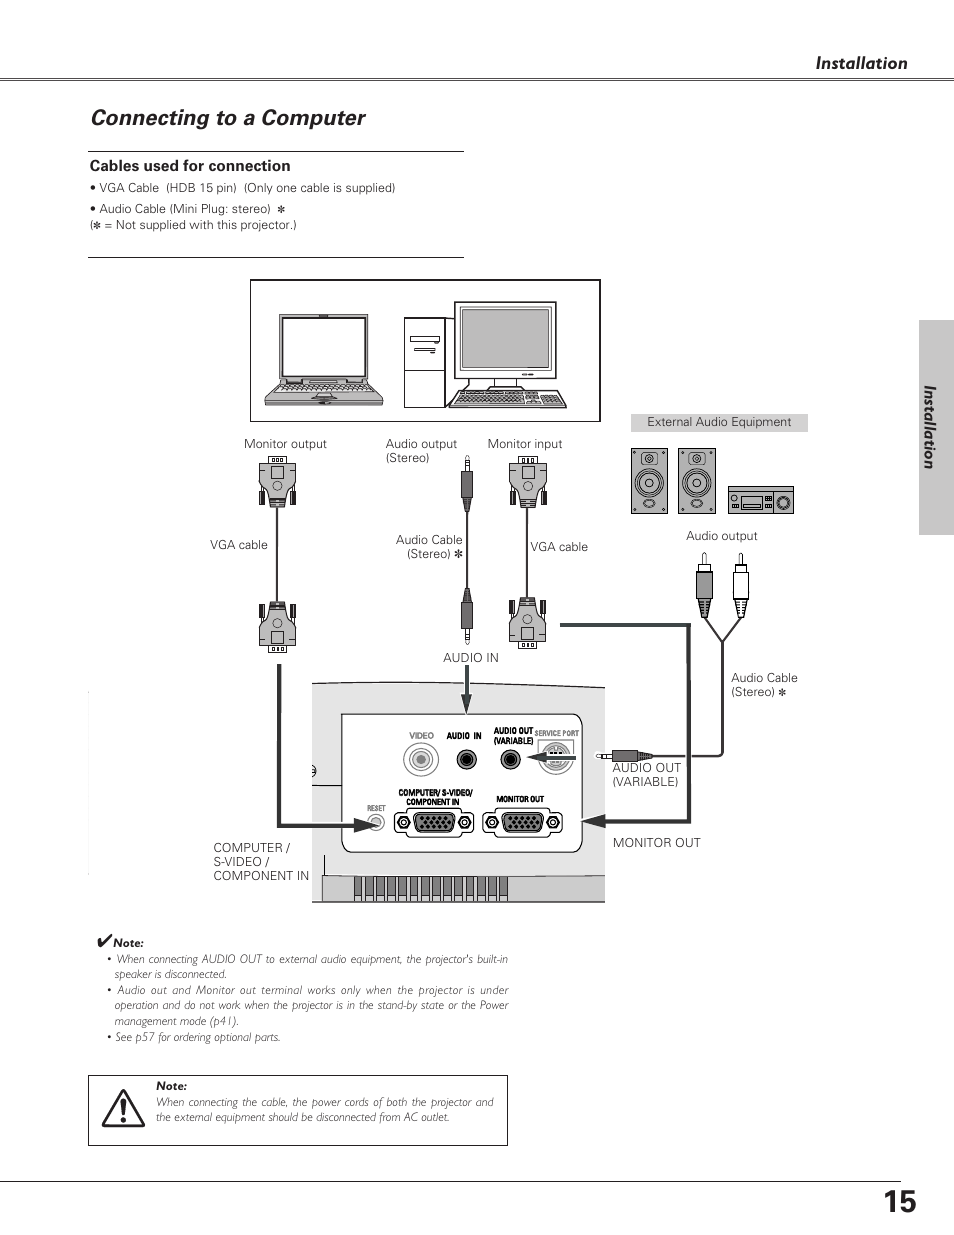 Connecting to a computer, Installation | Canon LV-S4 User Manual | Page 15 / 60